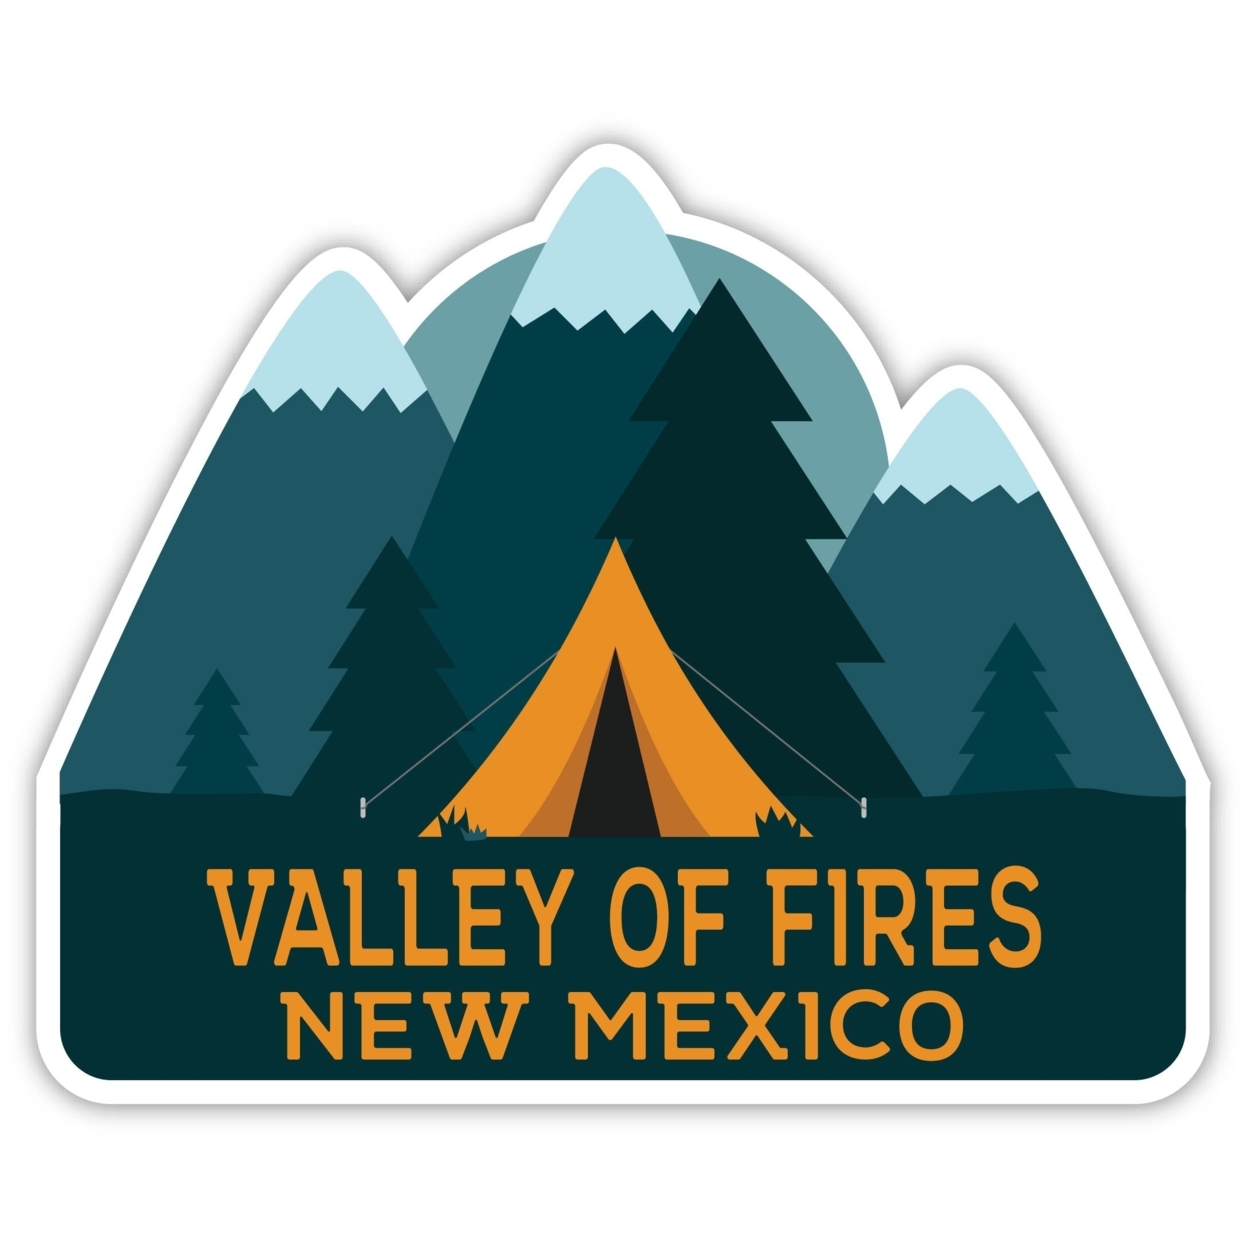 Valley Of Fires New Mexico Souvenir Decorative Stickers (Choose Theme And Size) - Single Unit, 2-Inch, Tent